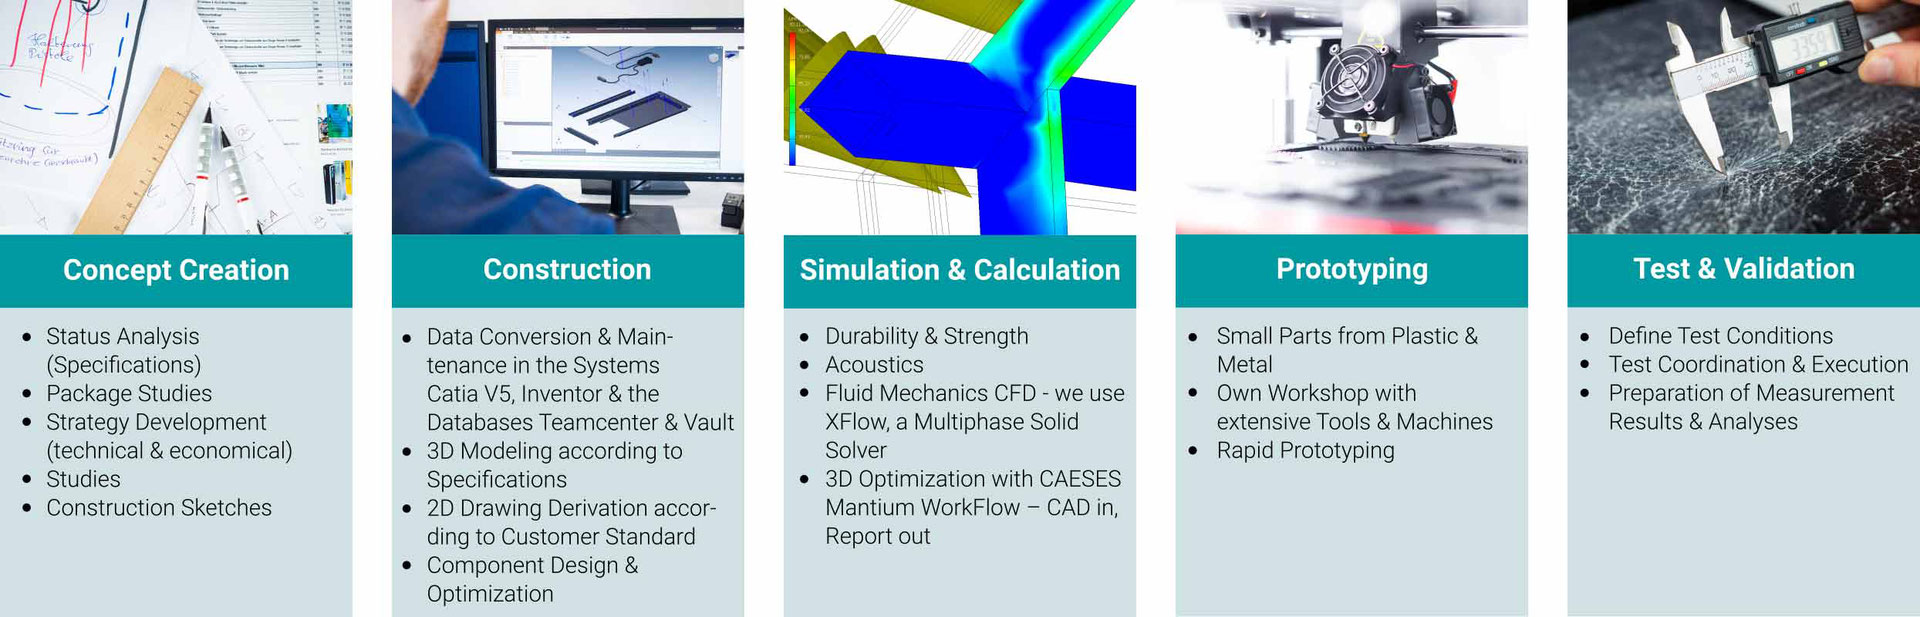 paXos Engineering Sectors: Concept Creation, Construction, Simulation & Calculation, Protoyping and Test & Validation